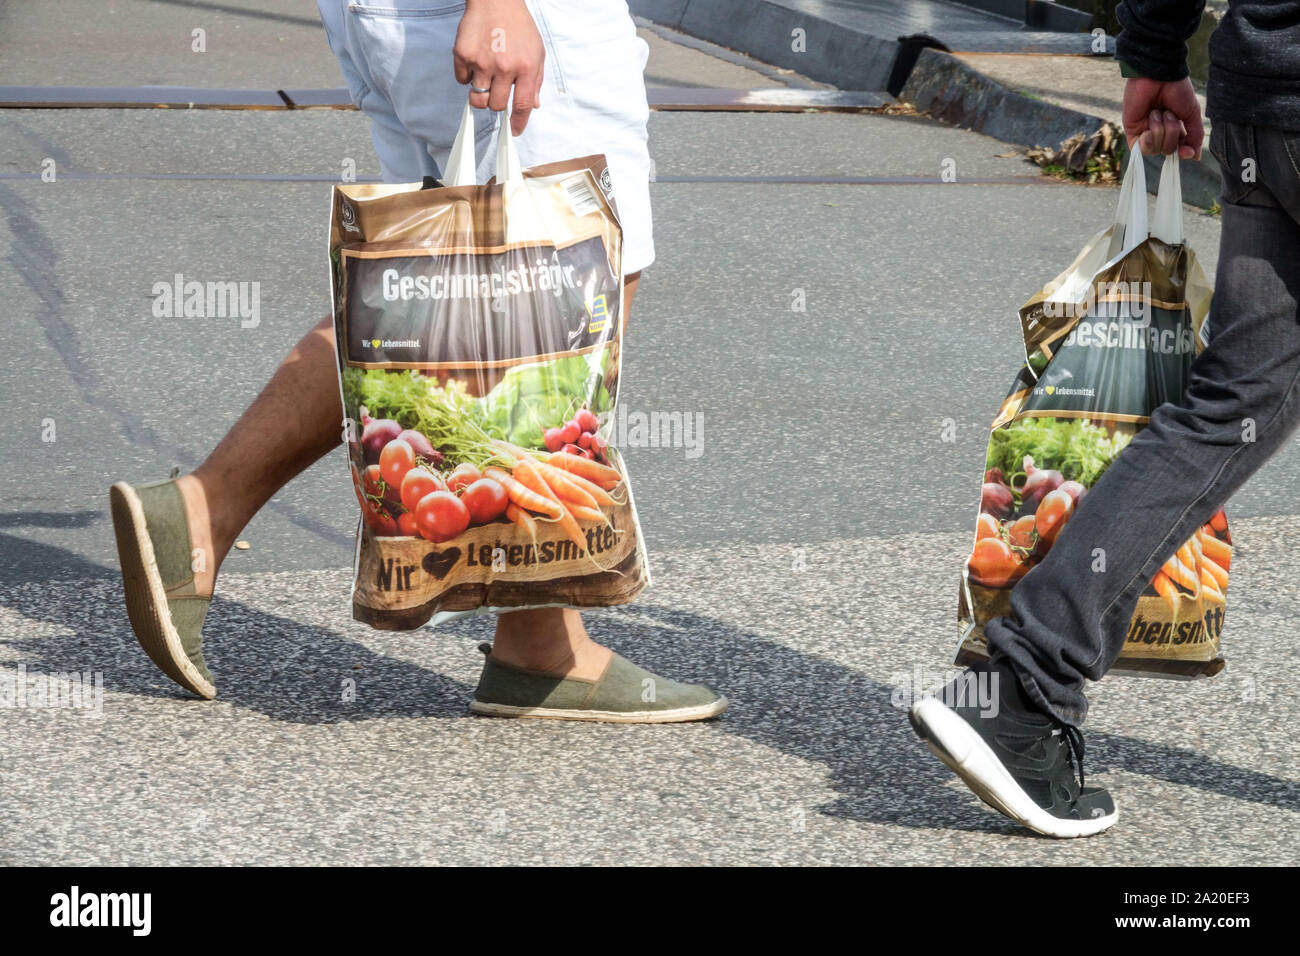 Customers take away their shopping in full plastic bags from the supermarket Germany Europe Stock Photo